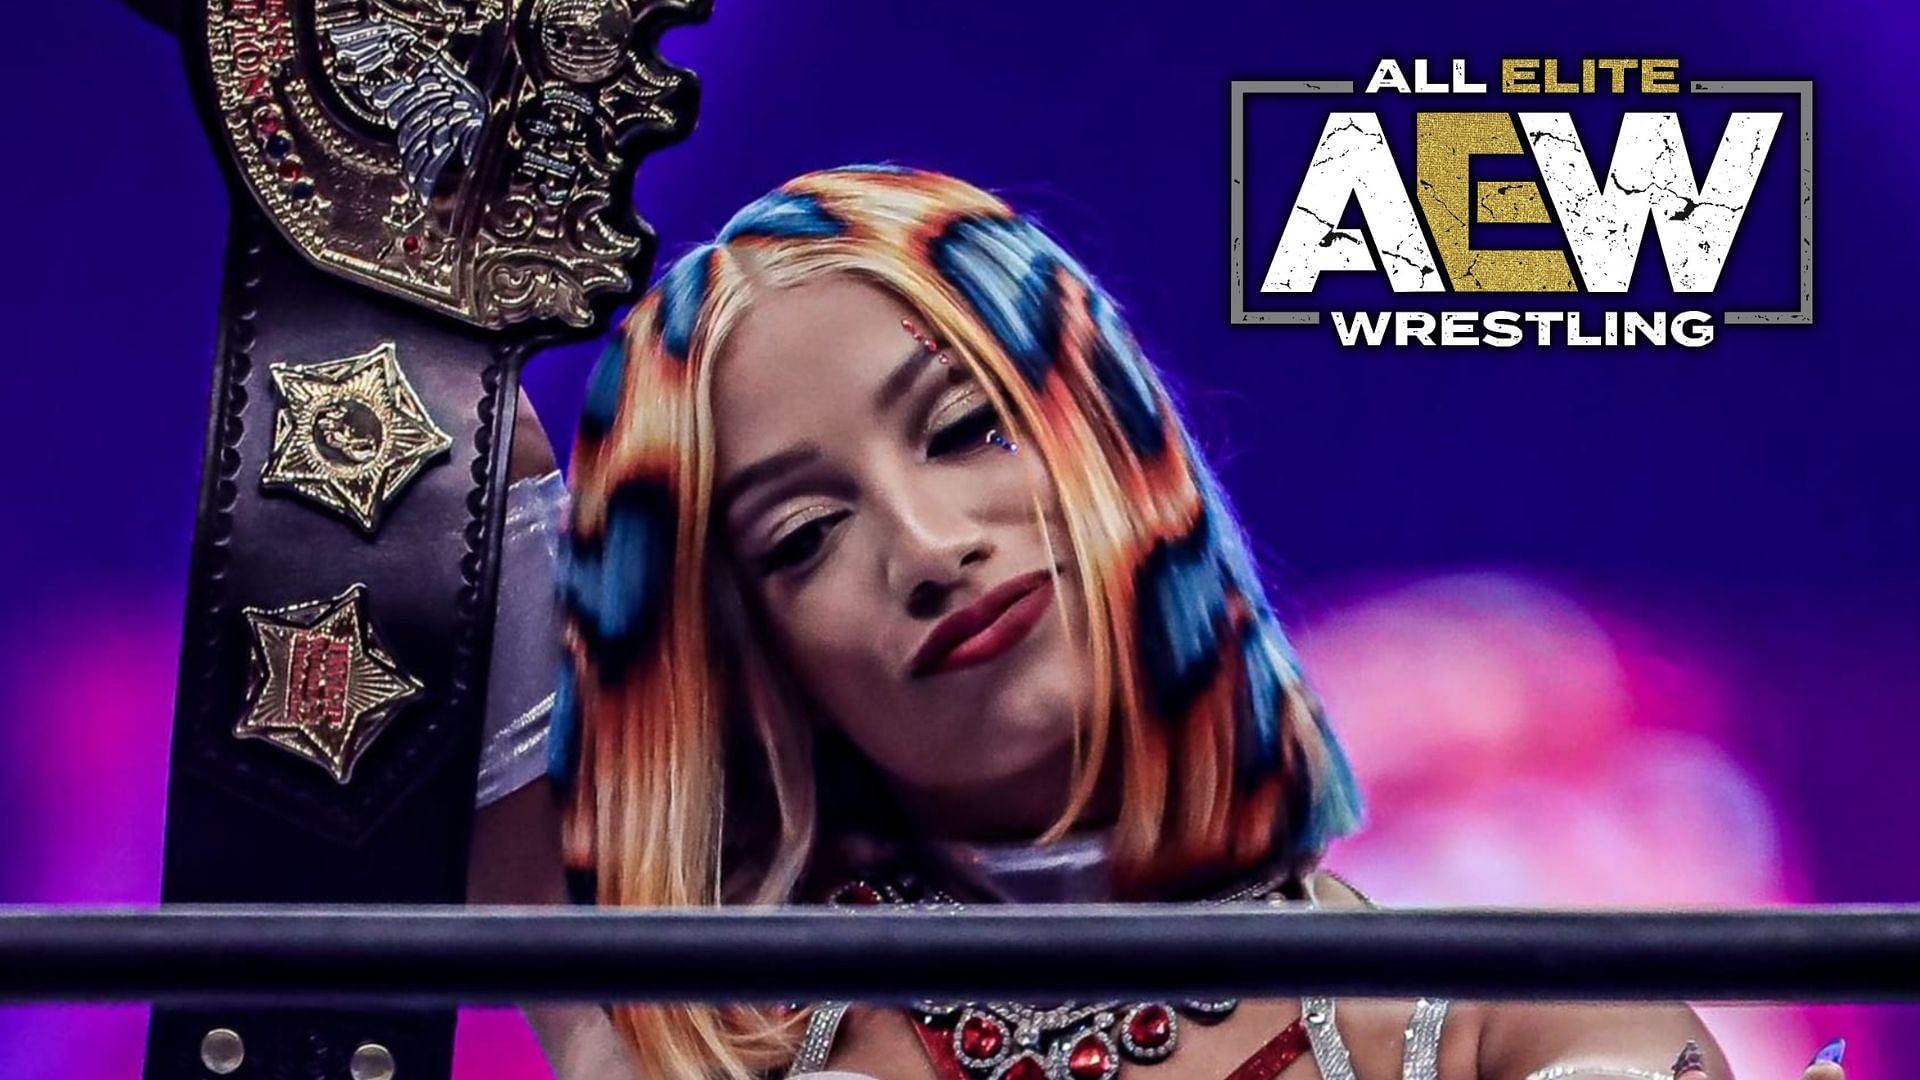 Mercedes Mone recently interacted with an AEW star!